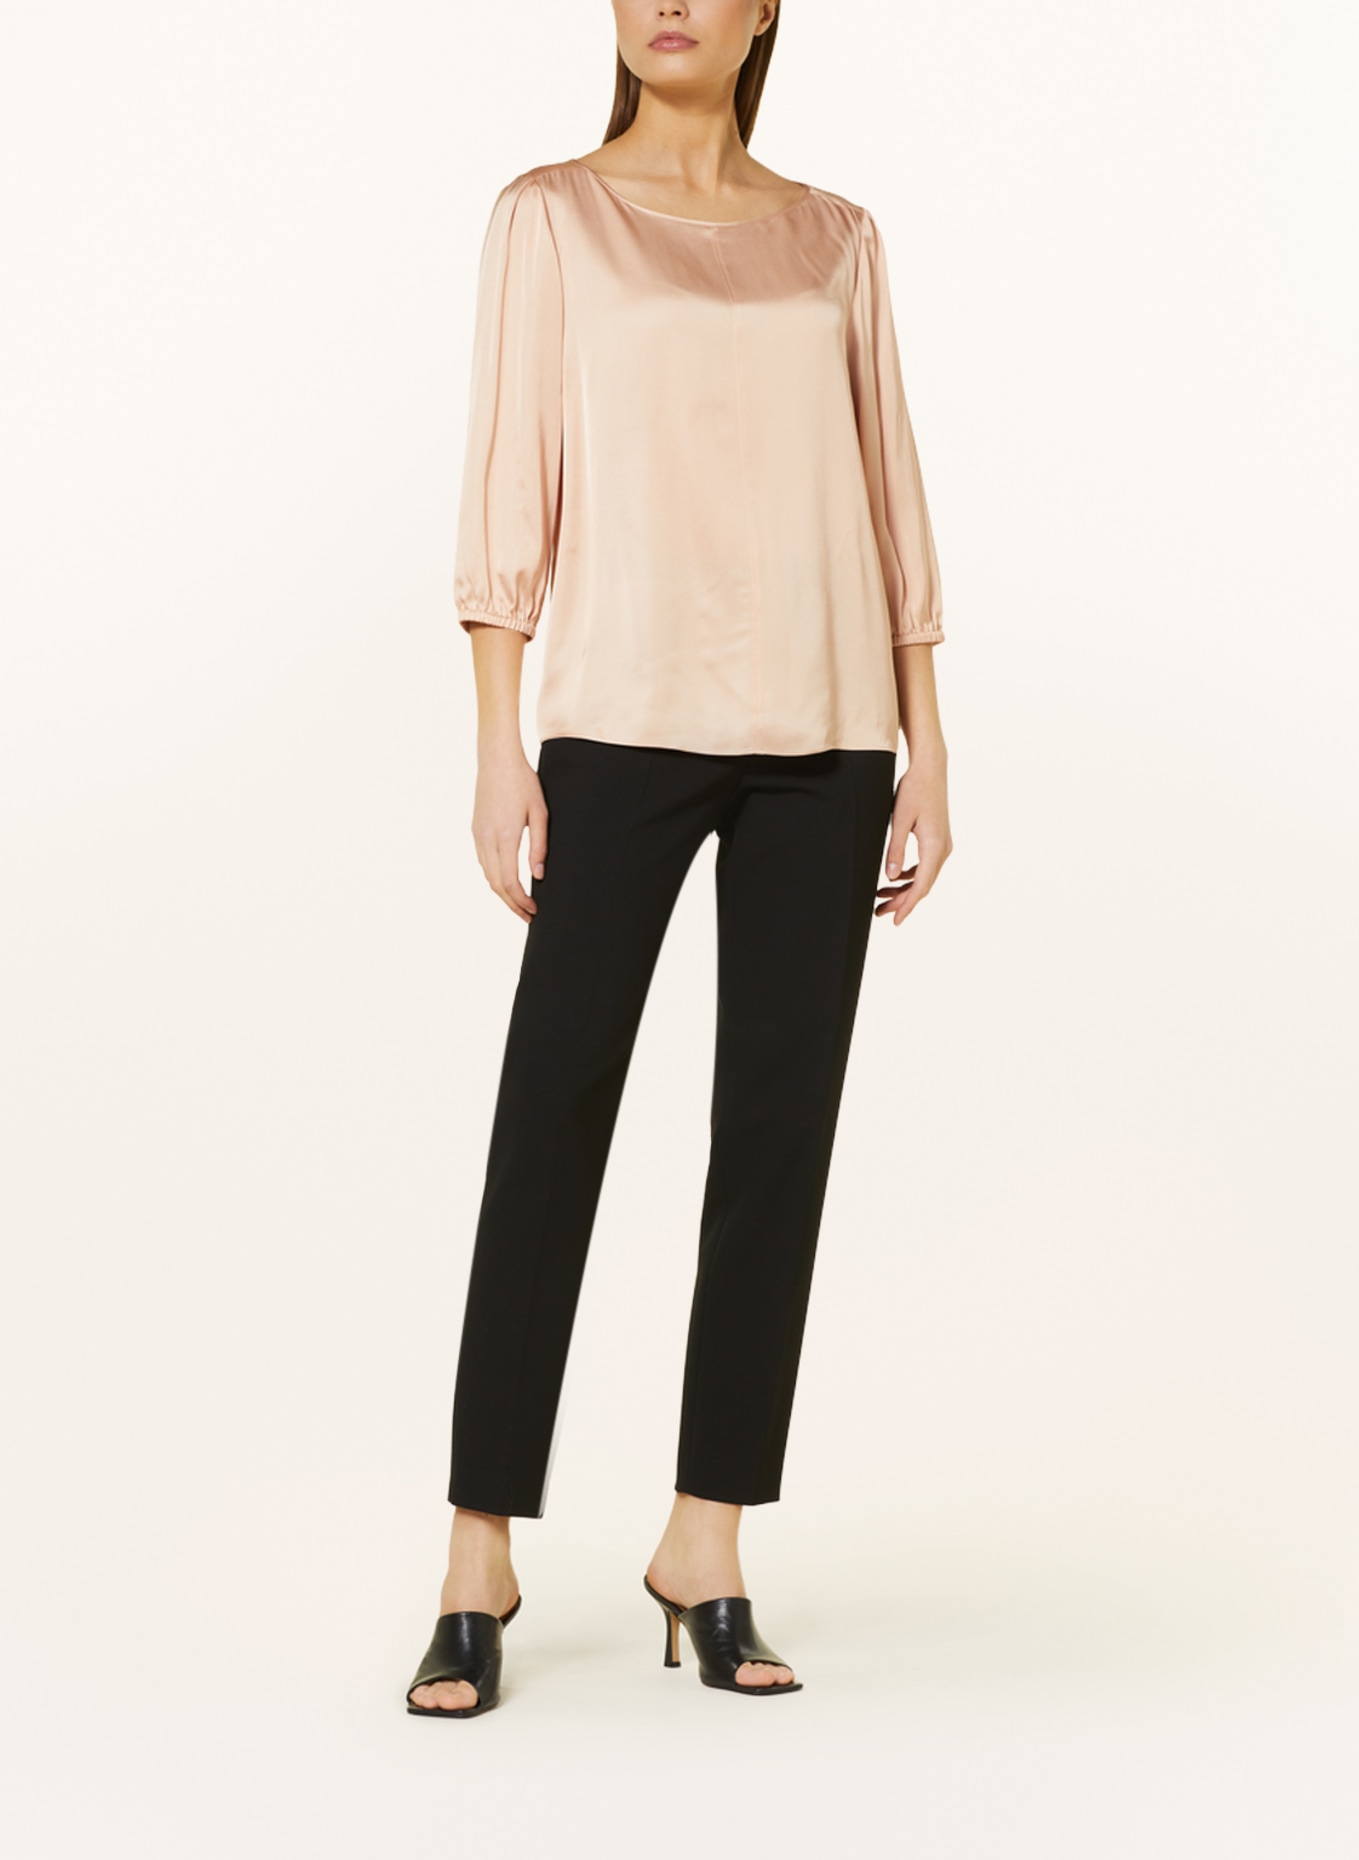 MARC CAIN Shirt blouse made of satin with 3/4 sleeves, Color: 209 sandy beige (Image 2)